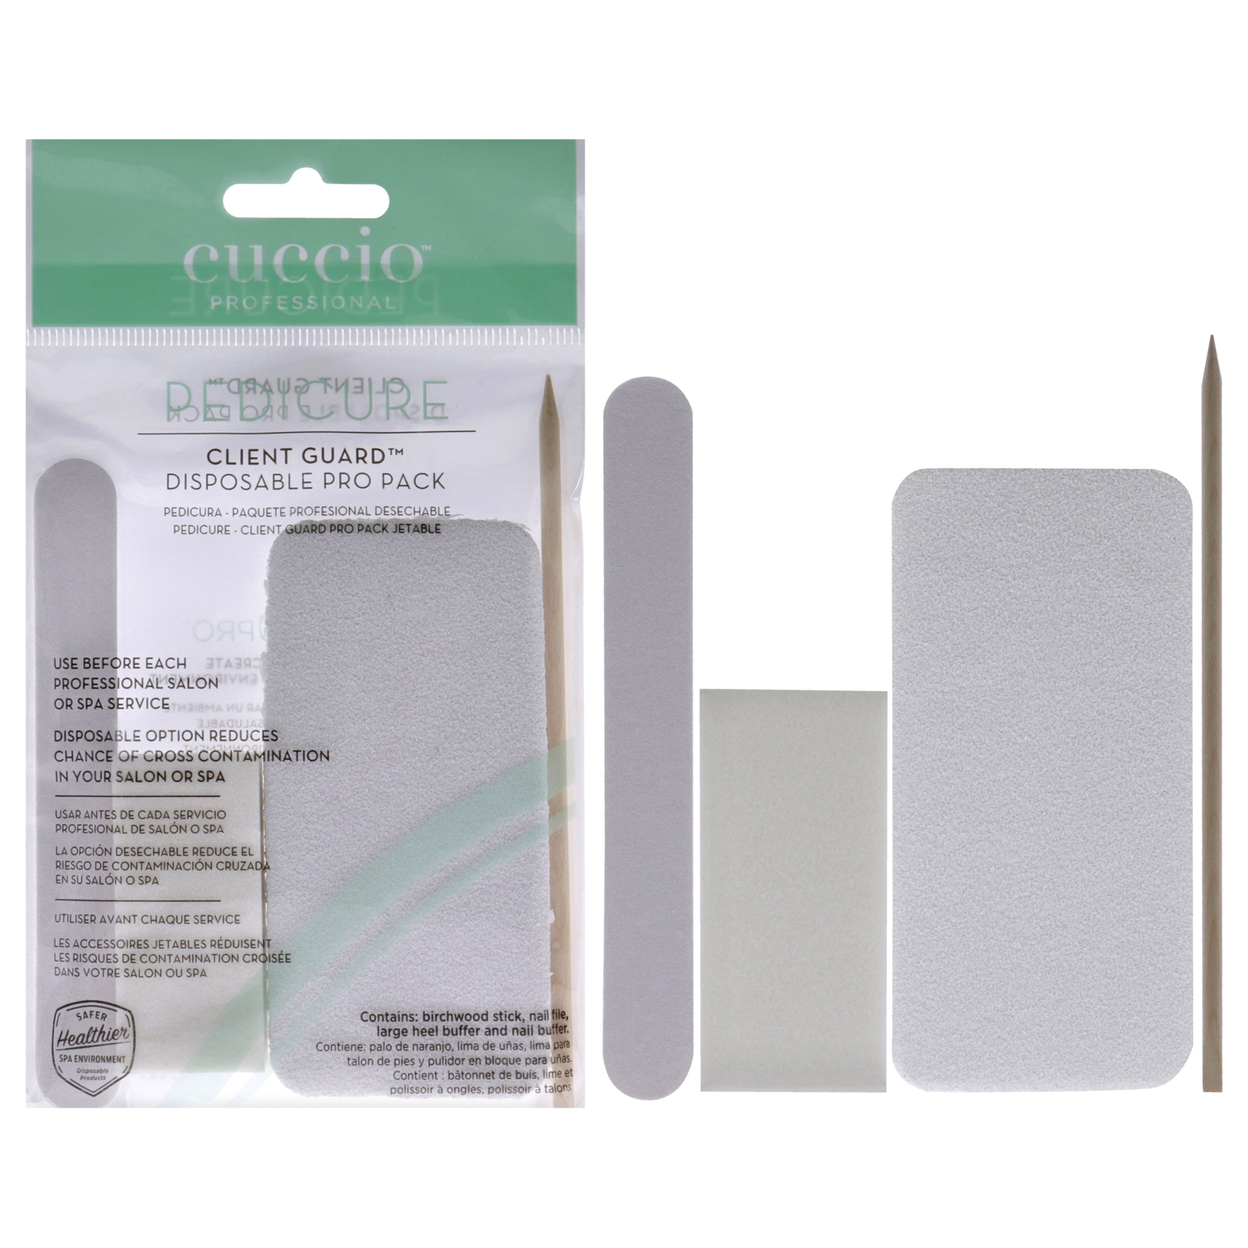 Cuccio Pro Pedicure Client Guard Disposable Pro Pack Birchwood Stick, Nail File, Large Heel Buffer, Nail Buffer 4 Pc